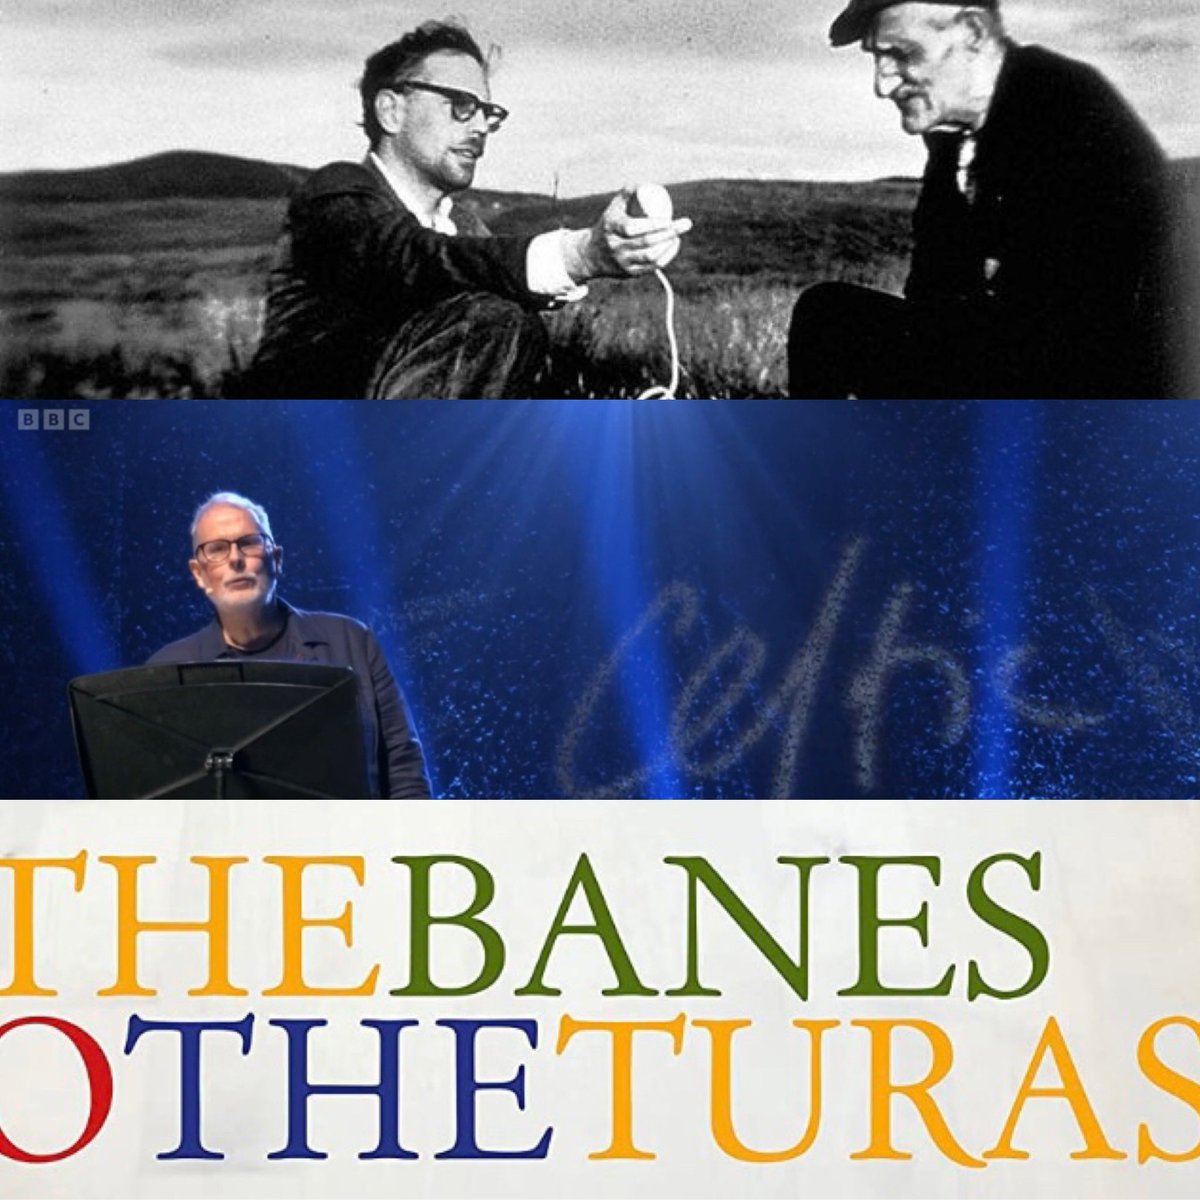 Excited to be bringing the Banes o the Turas to @ccfest - a weave of poetry & music inspired by Hamish Henderson & chuffed to be joined the brilliant @AlihuttonPipes @BarryReidMusic @fionahscotssong & @patsyreid celticconnections.com/event/1/jim-ma…